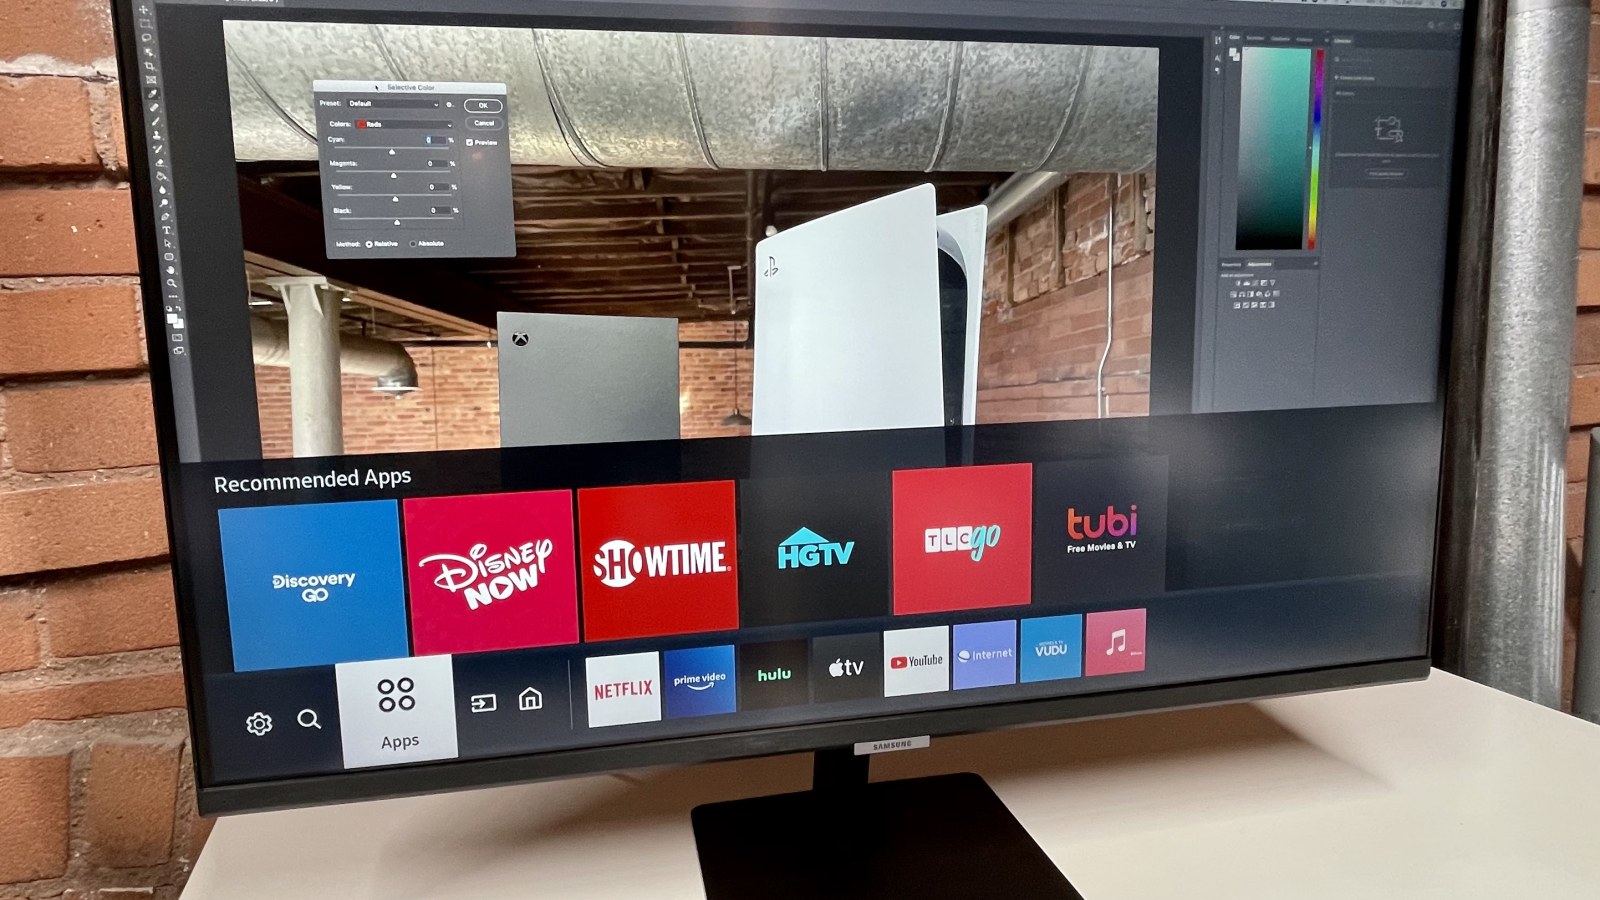 Samsung Smart Monitor M7 Review: The Perfect Display for Work and Play